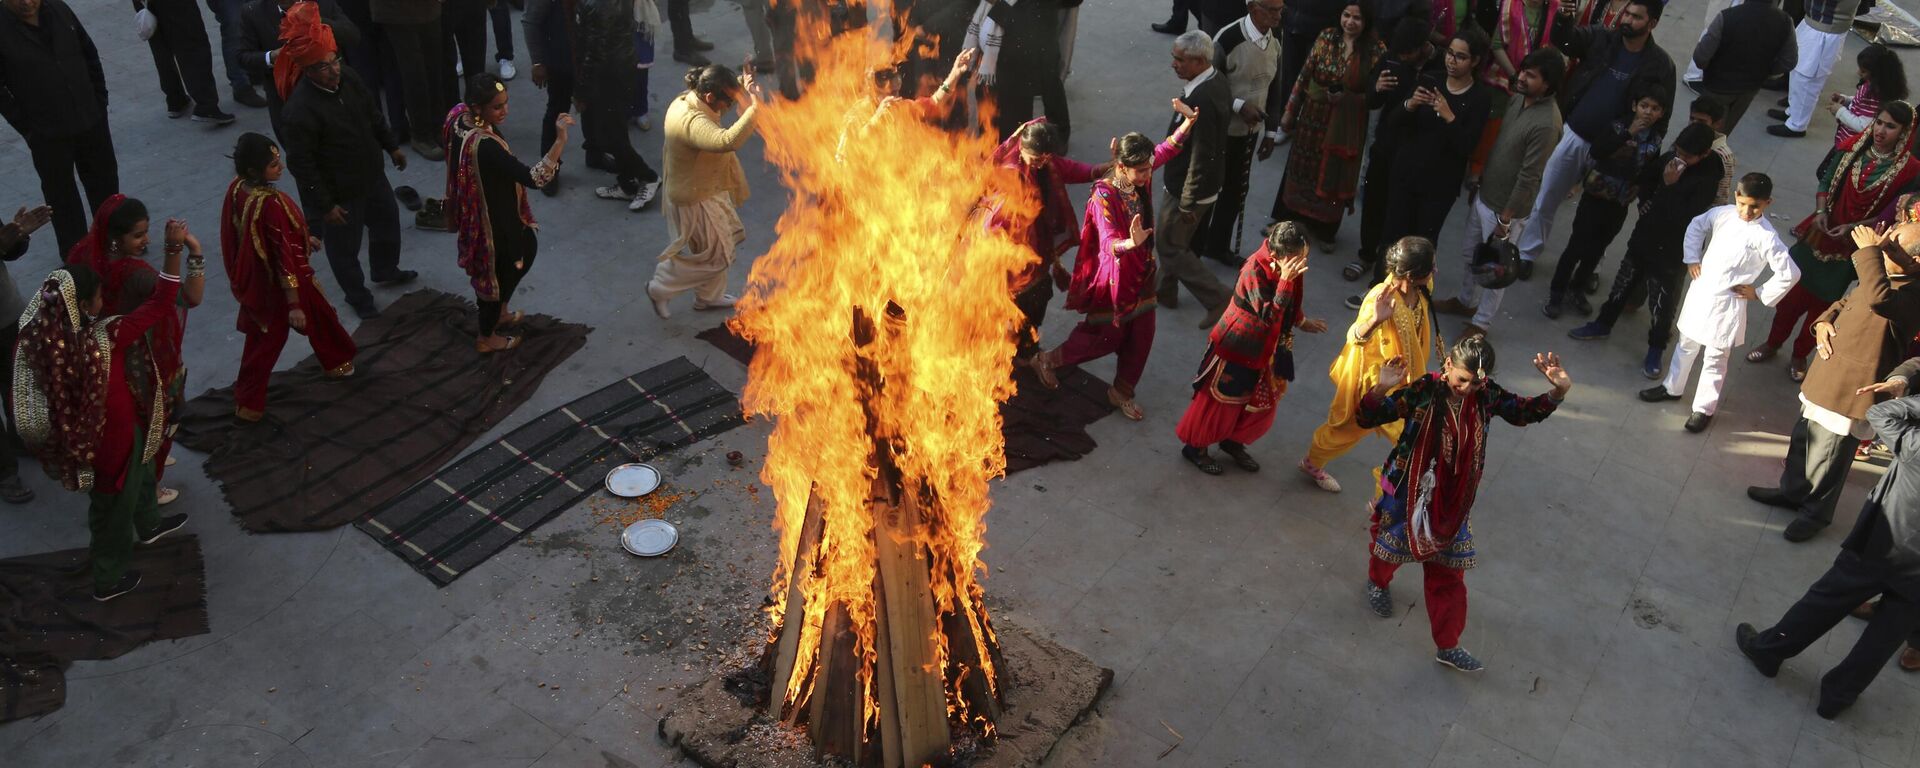 Indian girls in traditional attire dance around a bonfire as they celebrate Lohri festival in Jammu, India, Sunday, Jan. 13, 2019. Lohri is a celebration of the winter solstice observed by Hindus and Sikhs in northern India. (AP Photo/Channi Anand) - Sputnik India, 1920, 08.01.2024